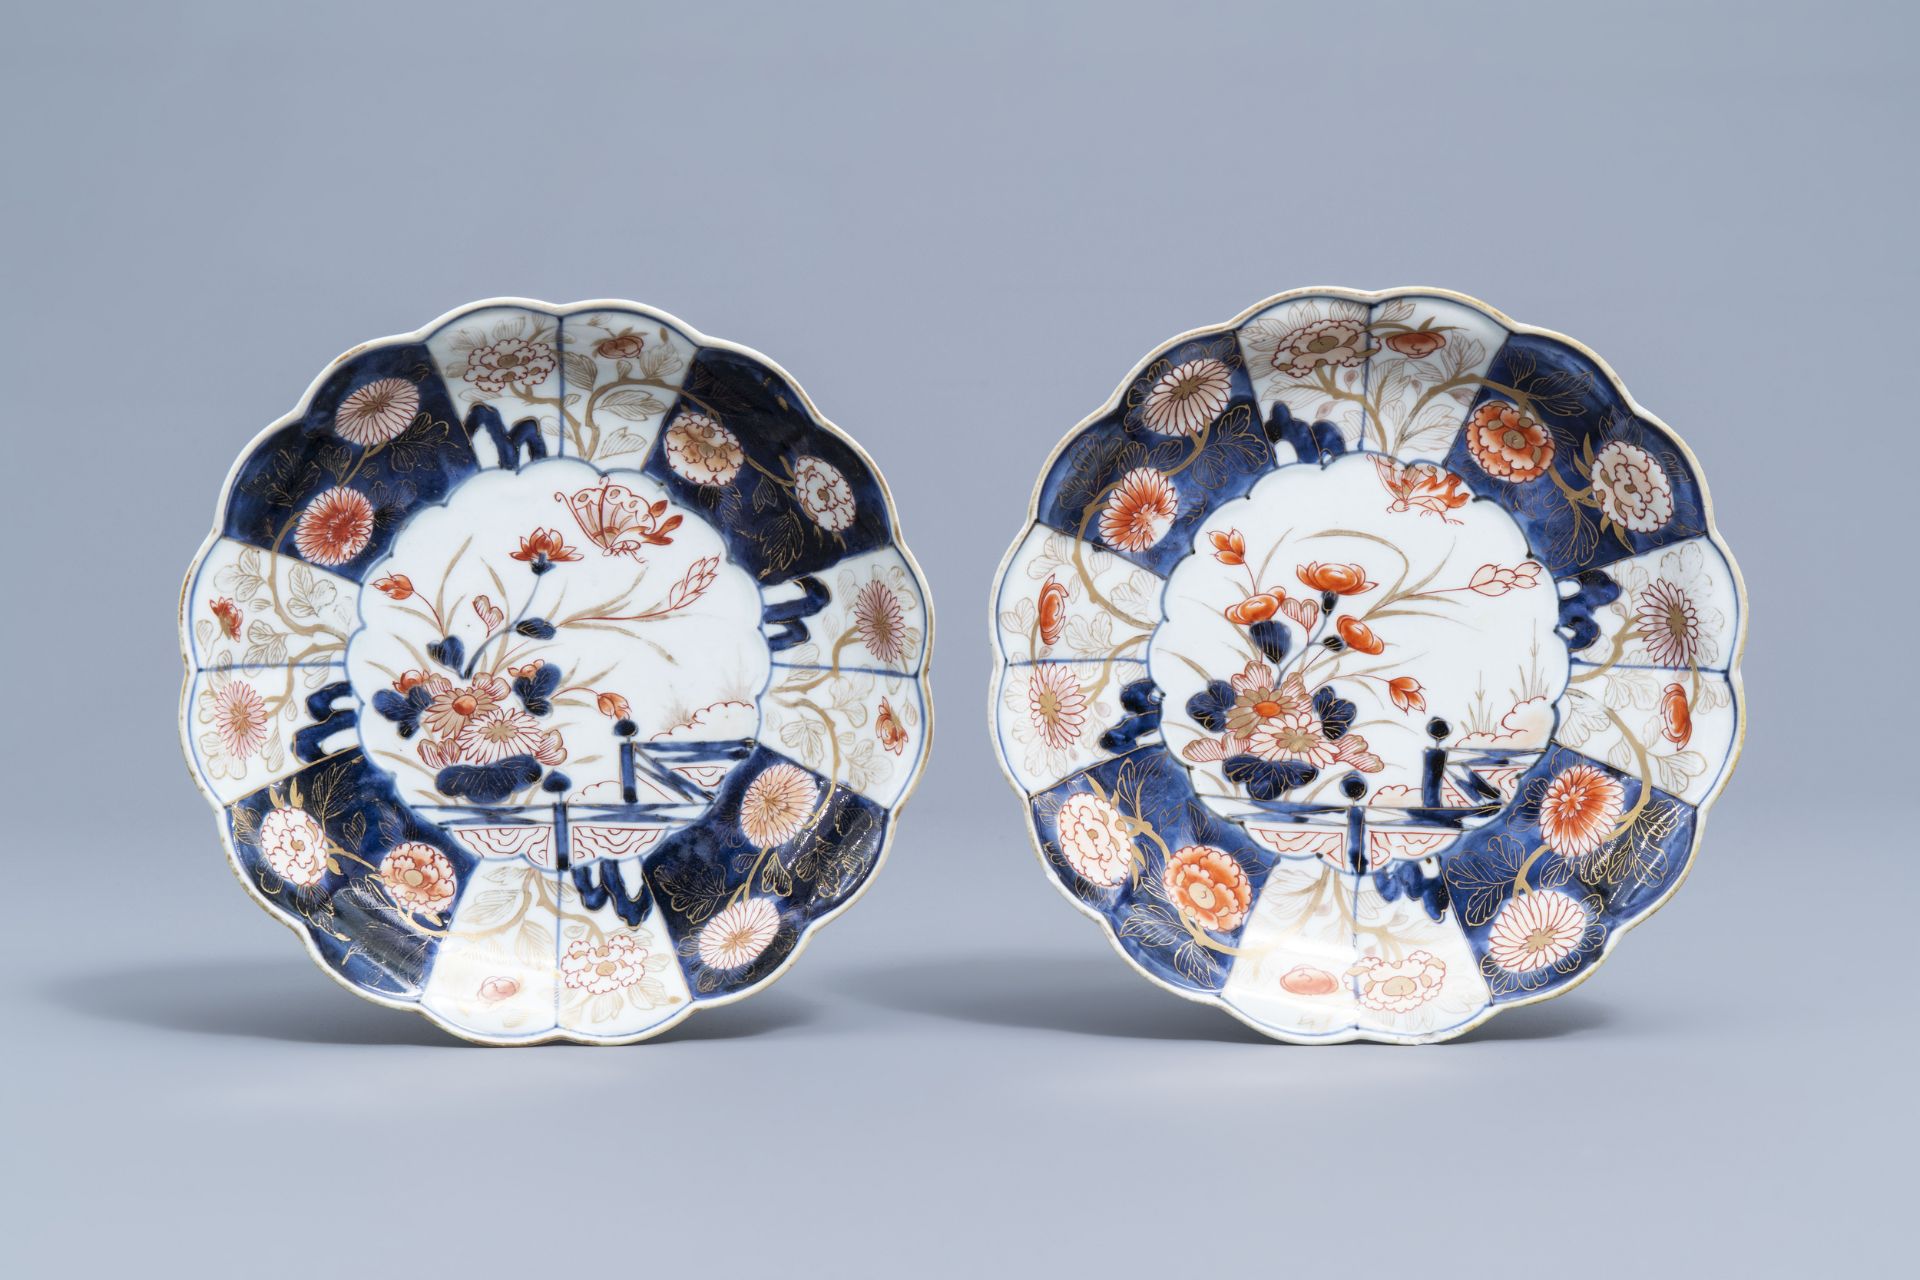 Seven Japanese Imari plates with scalloped rim and floral design, Edo, 18th C. - Image 6 of 7